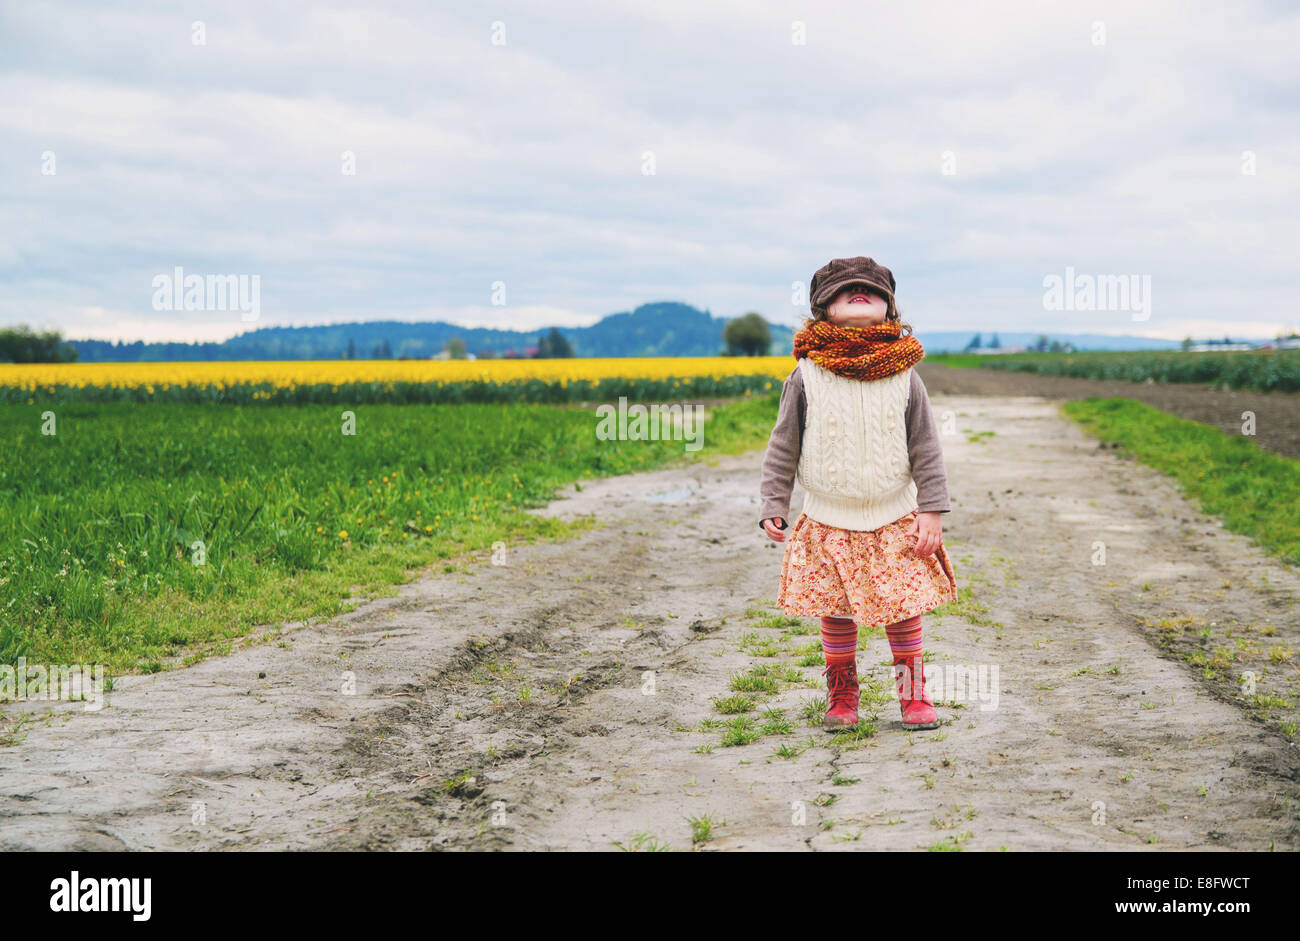 Girl standing in a tulip field looking up Stock Photo